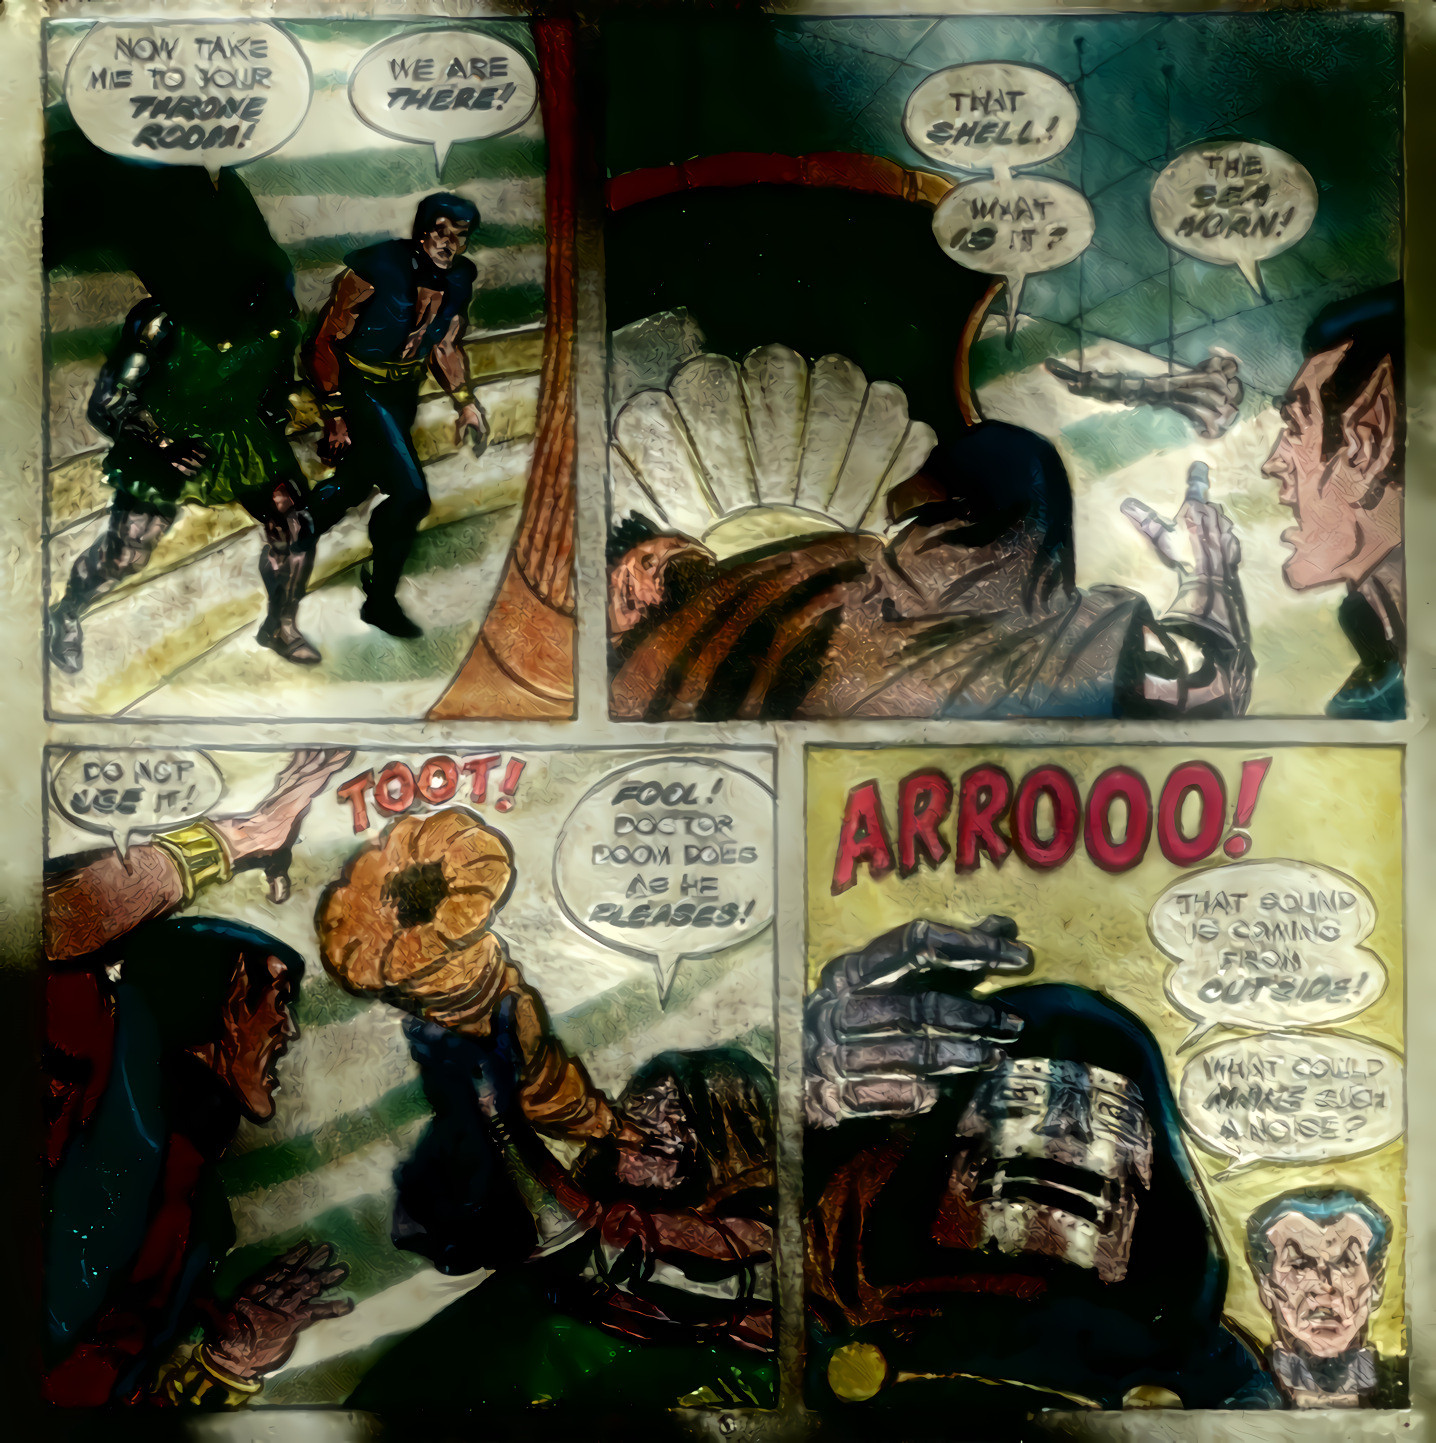 "Doctor Doom Does as He Pleases"